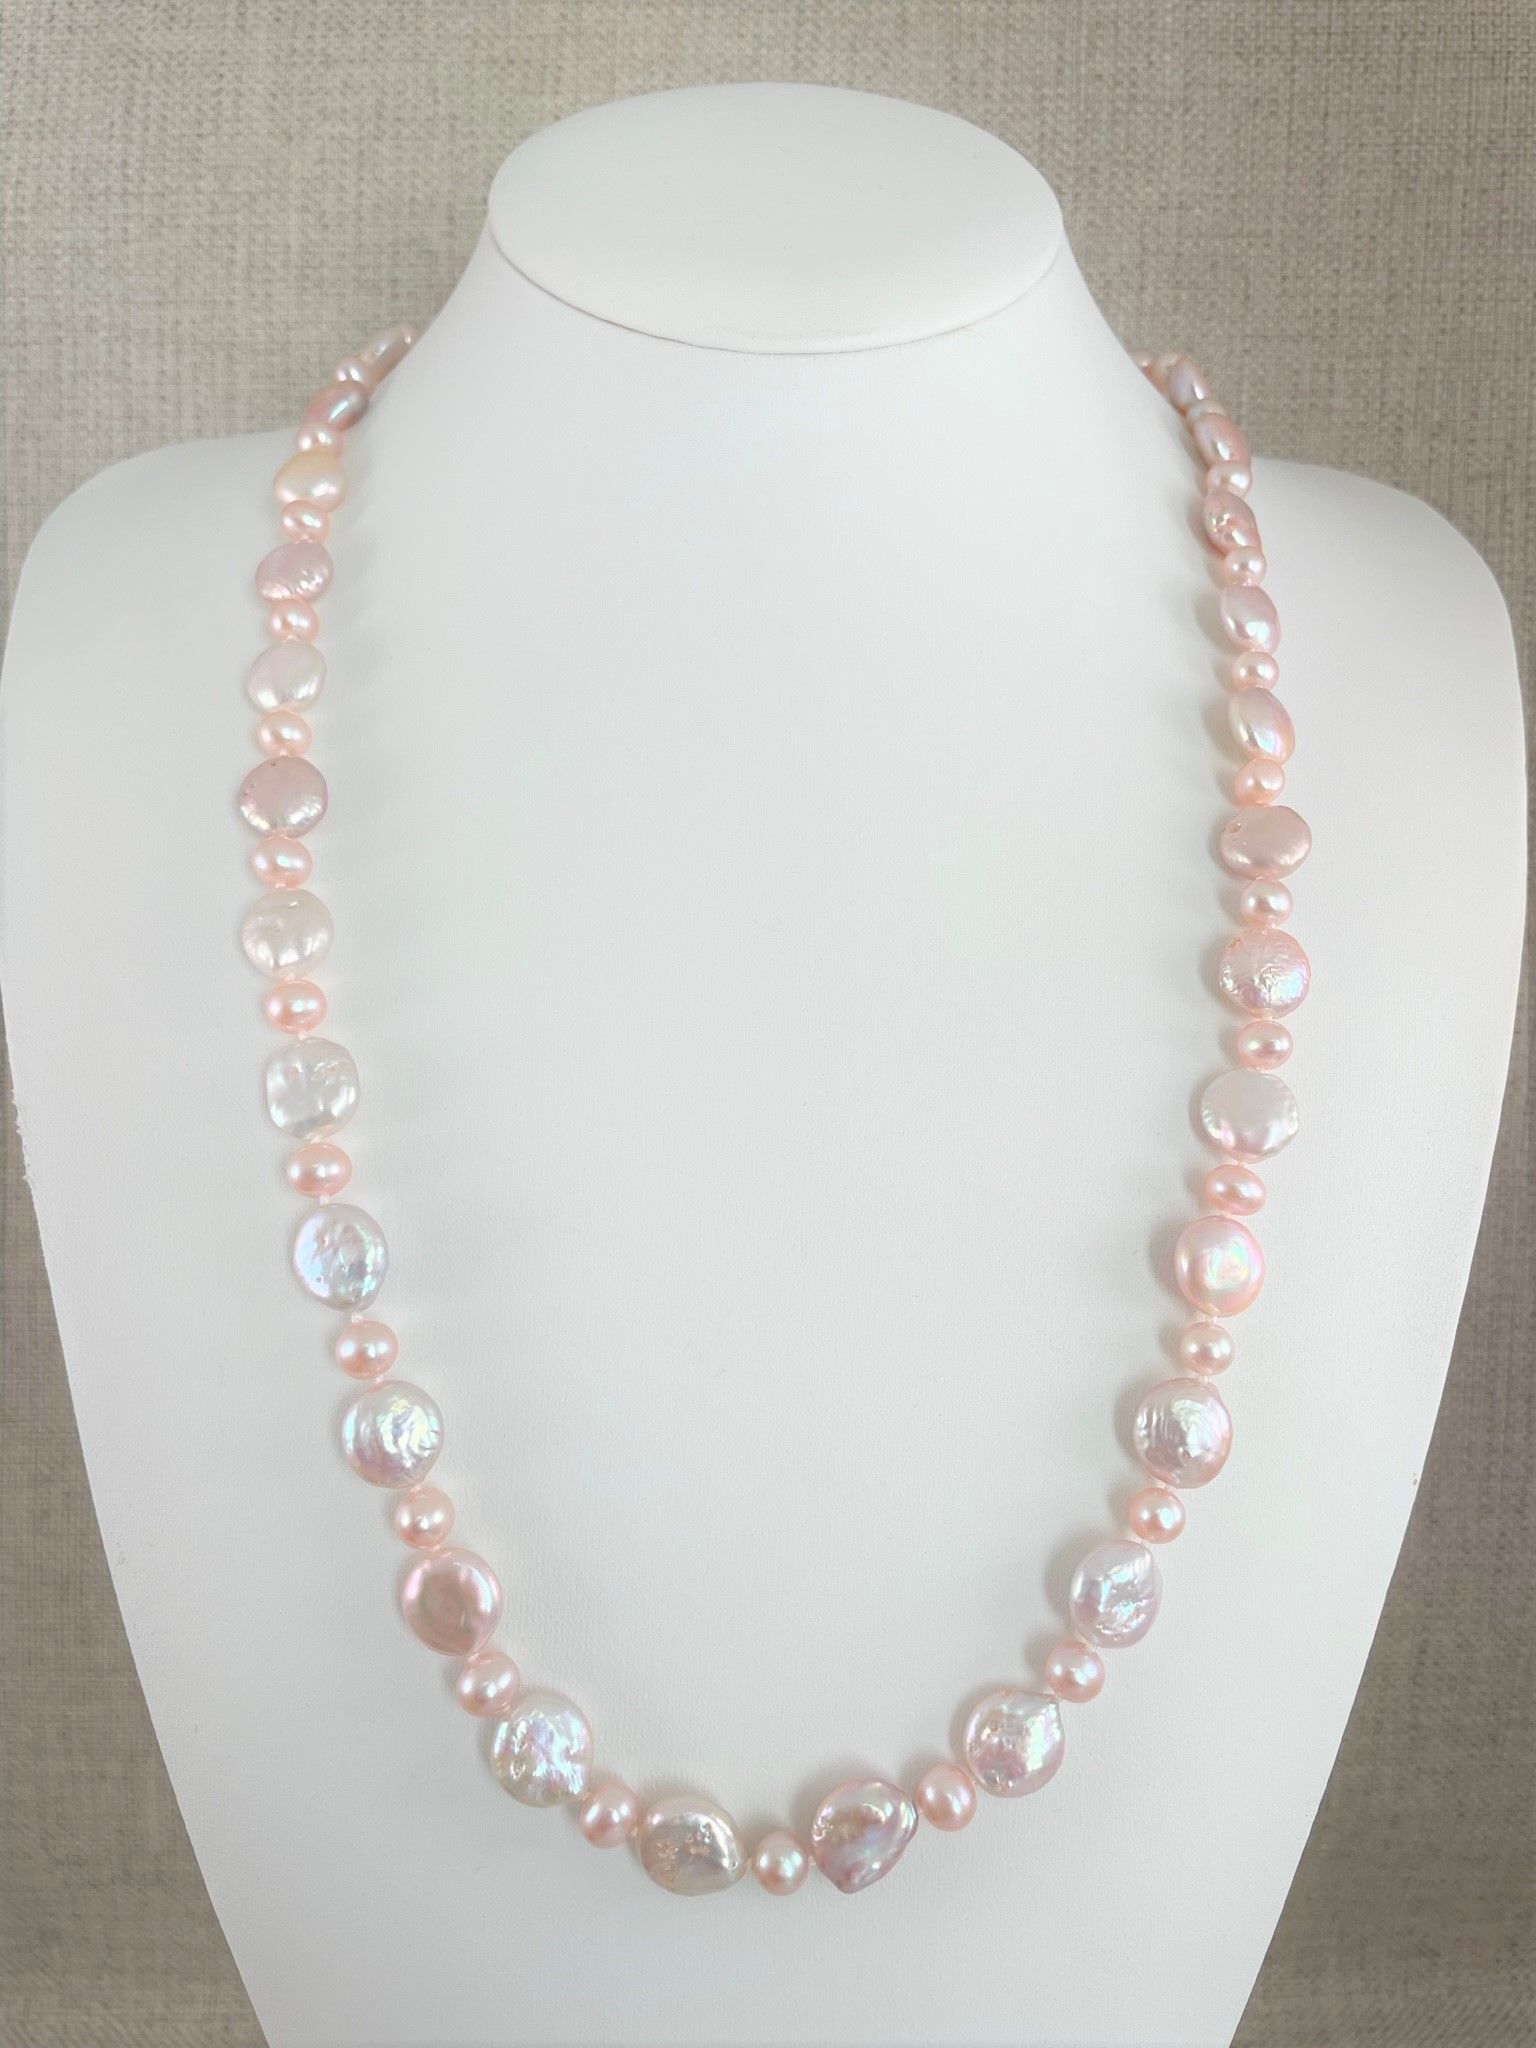 Coin Pearl Necklace with Round Silver Clasp Pink 